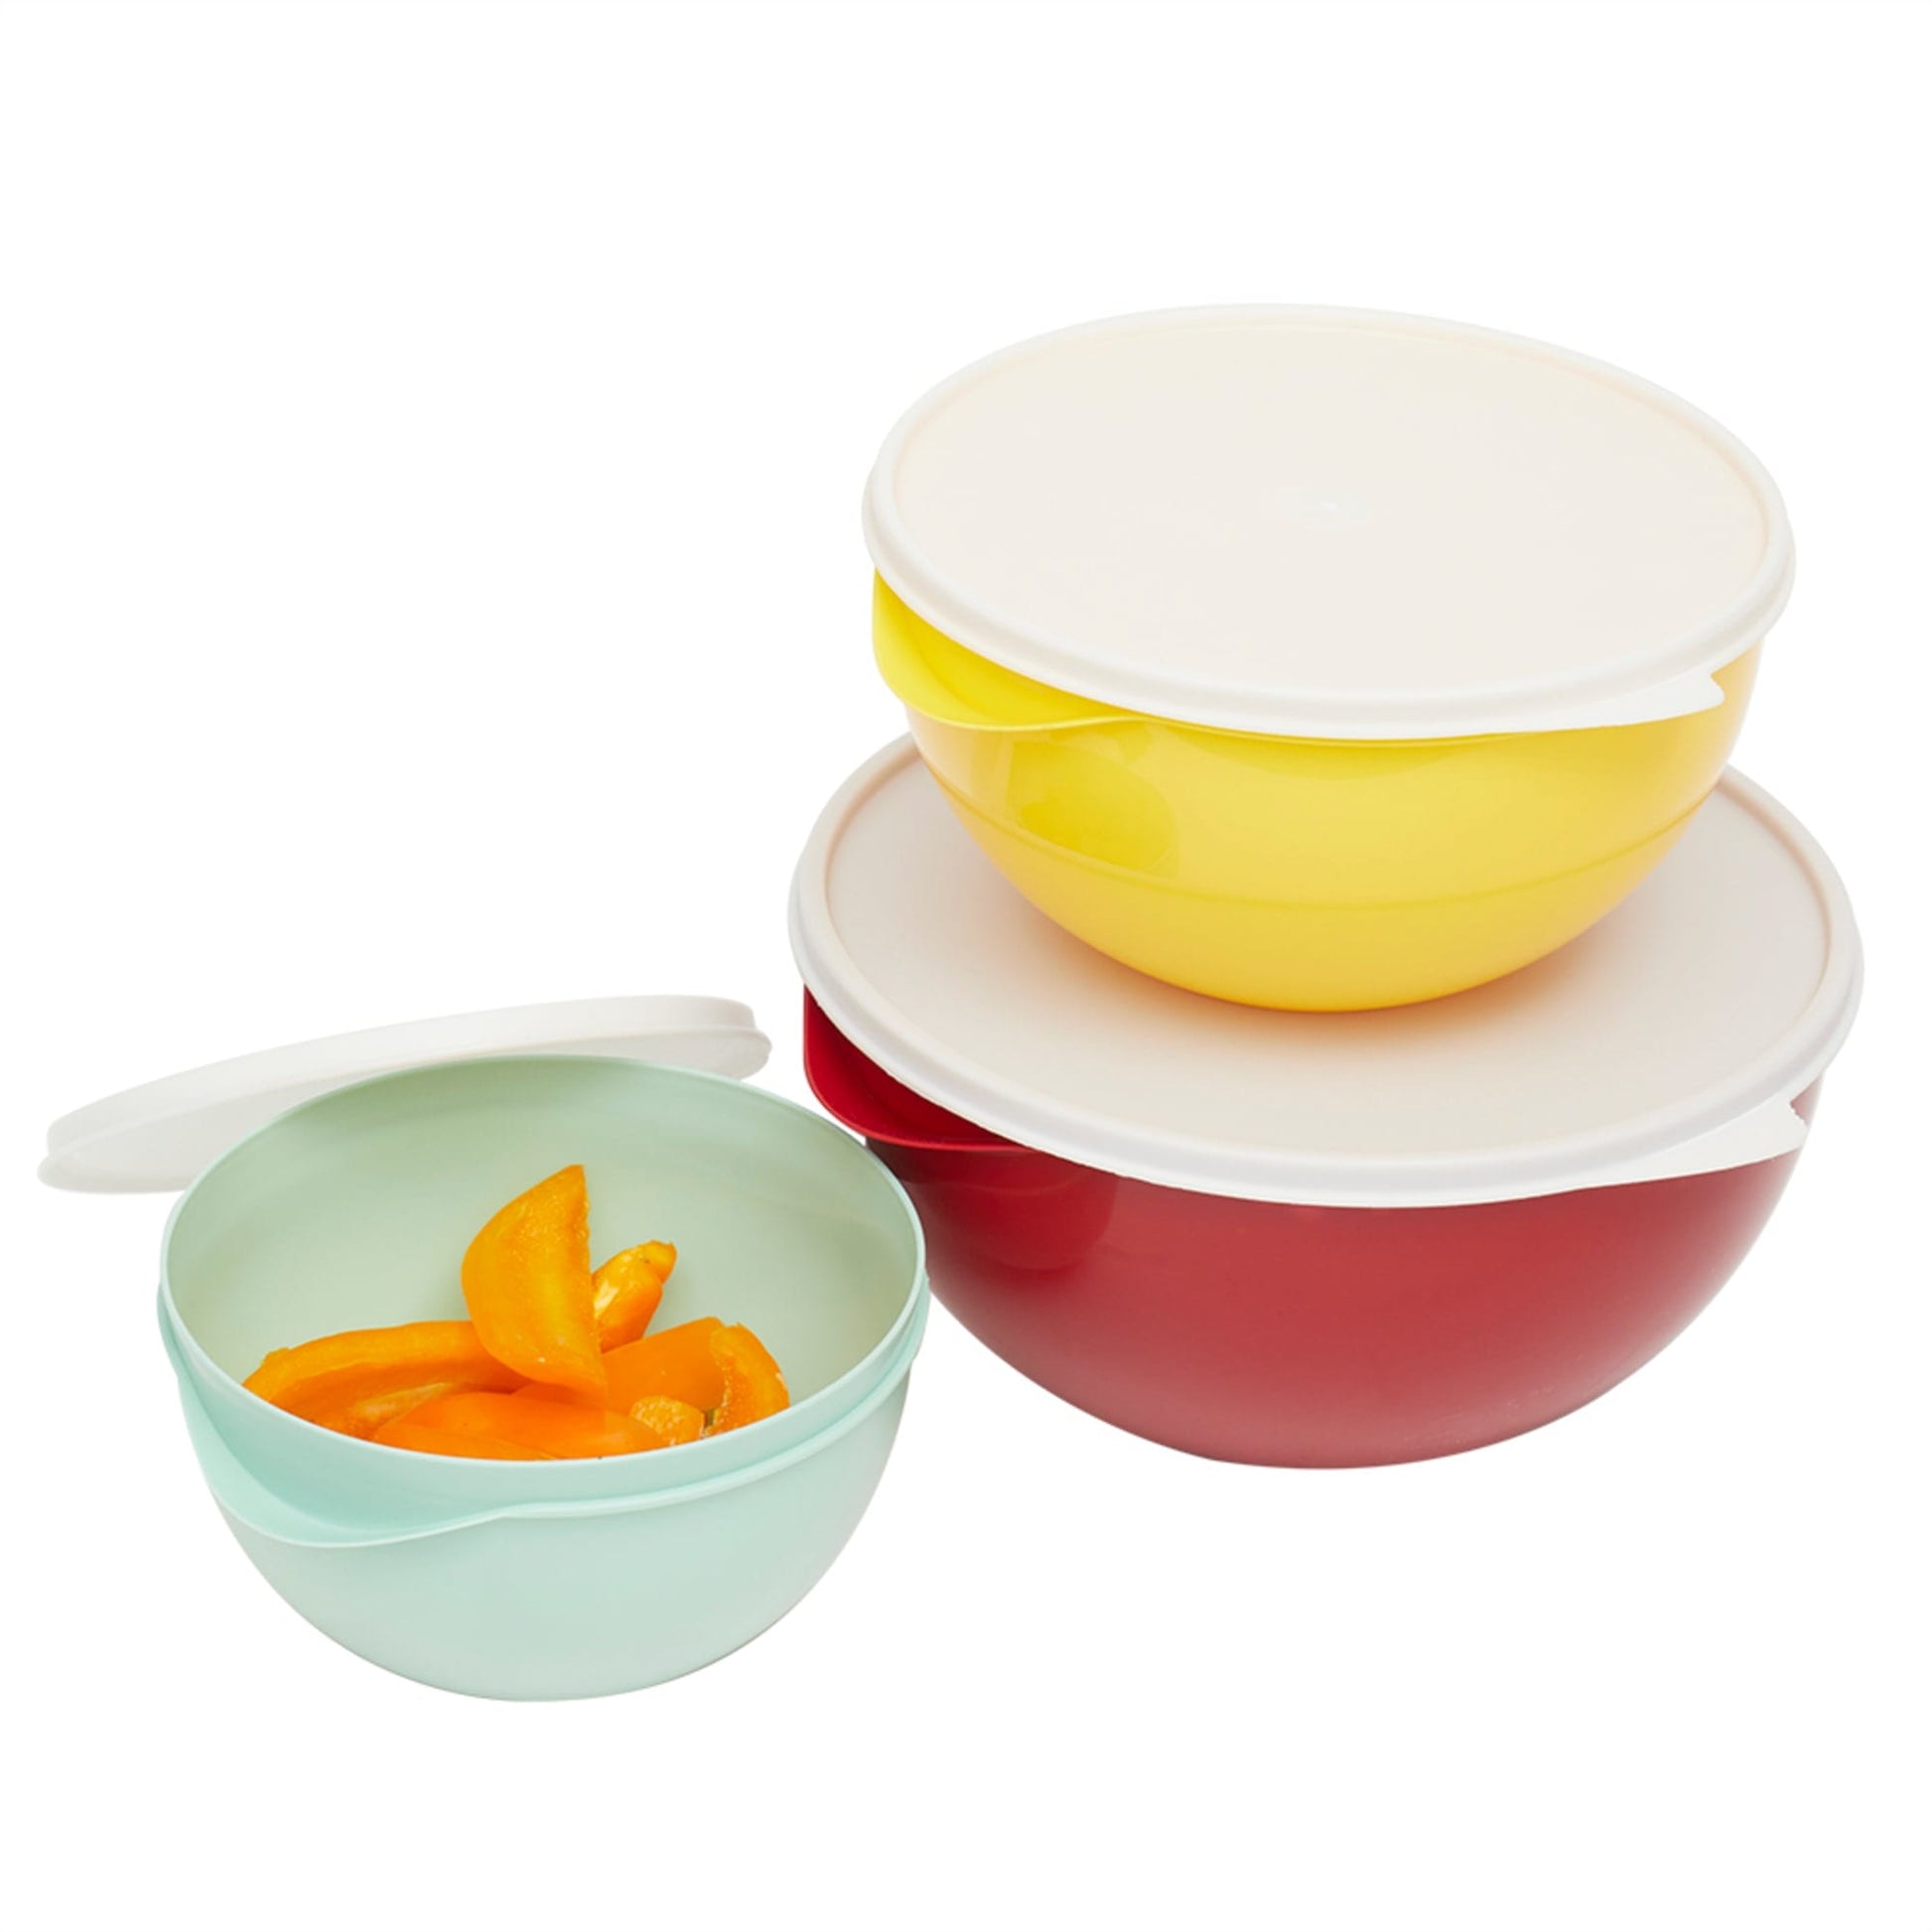 Wehome Mixing Bowls with Lids Set,Plastic Mixing Bowls for Kitchen Preparing,Serving and Storing,Set of 3-Includes 3 Bowls and 3 Lids,BPA-FREE Neat